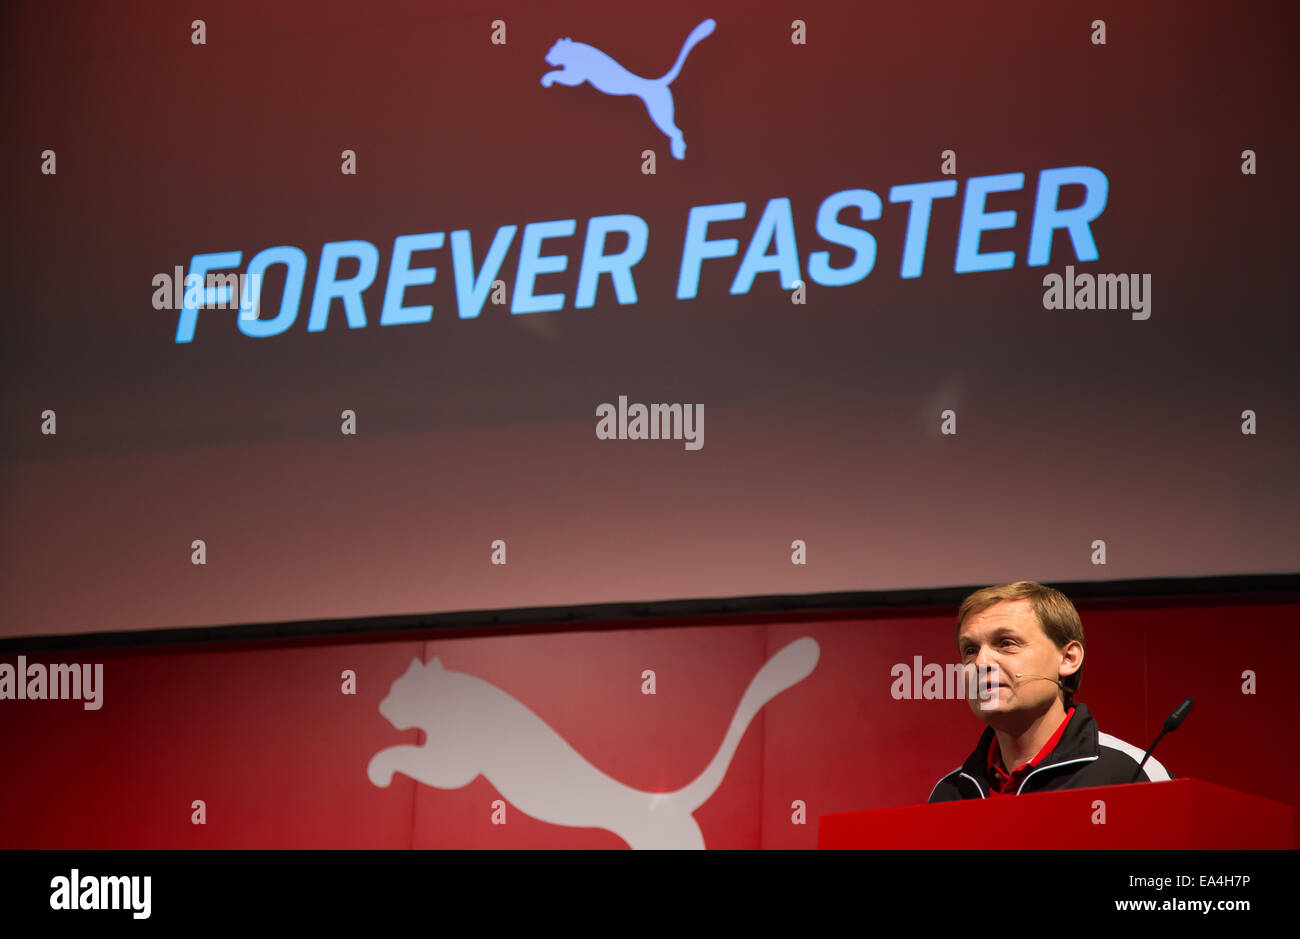 PUMA CEO Bjoern Gulden speaks during a press conference in Herzogenaurach,  German with Forever Faster slogan in the background. COMMERCIAL  HANDOUT/EDITORIAL USE ONLY/NO SALES. Please quote the source 